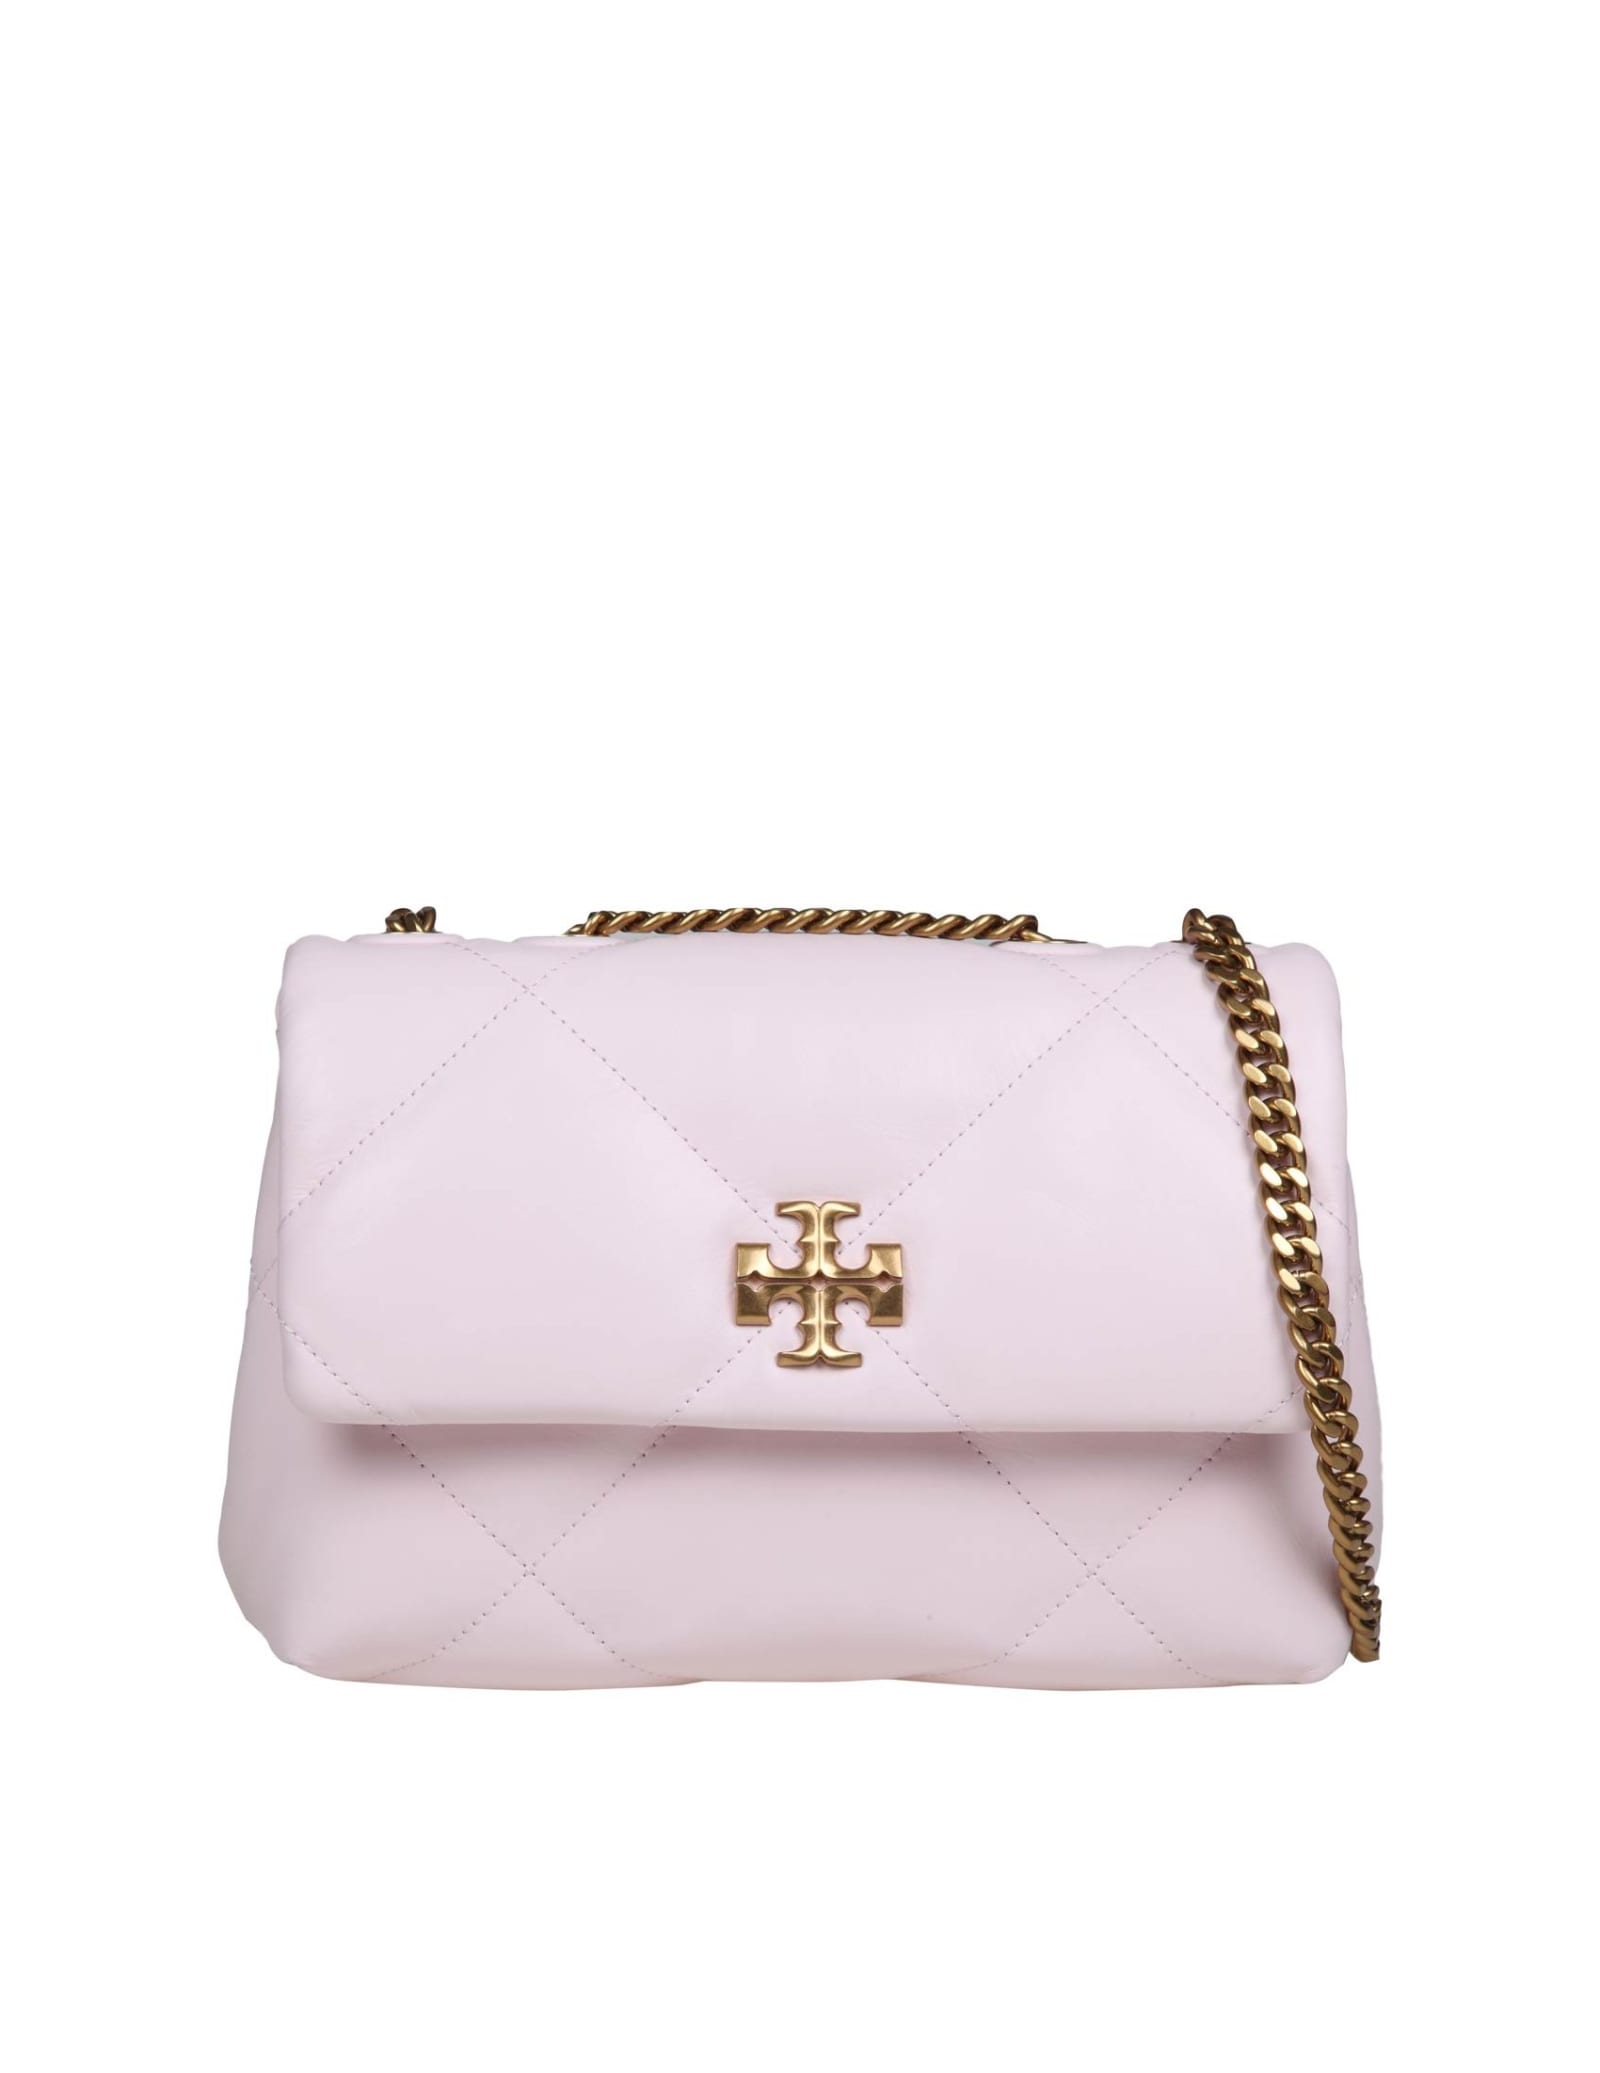 TORY BURCH KIRA SMALL DIAMOND QUILTED PINK COLOR